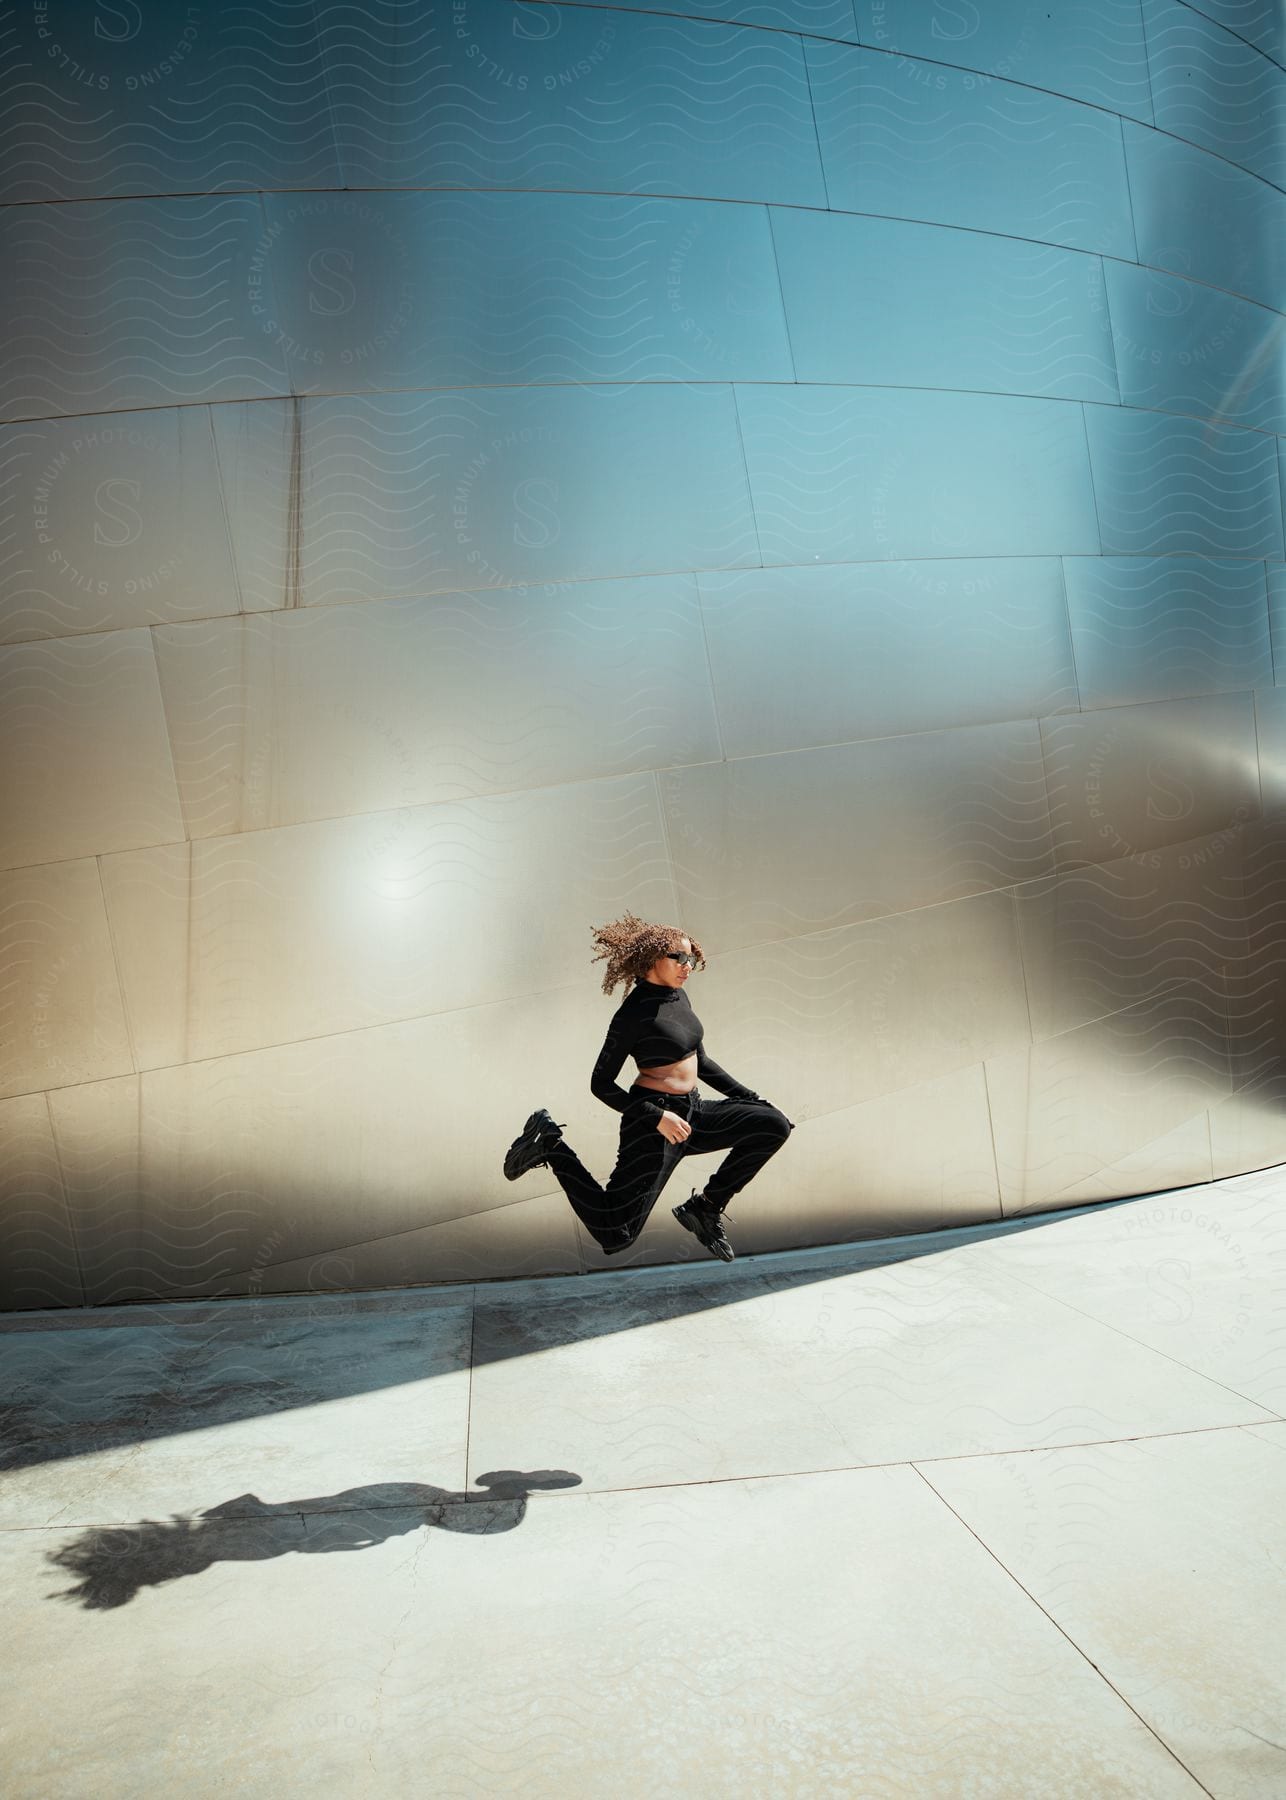 A women is  jumping in the air in front of a concrete wall with her legs in a running motion.